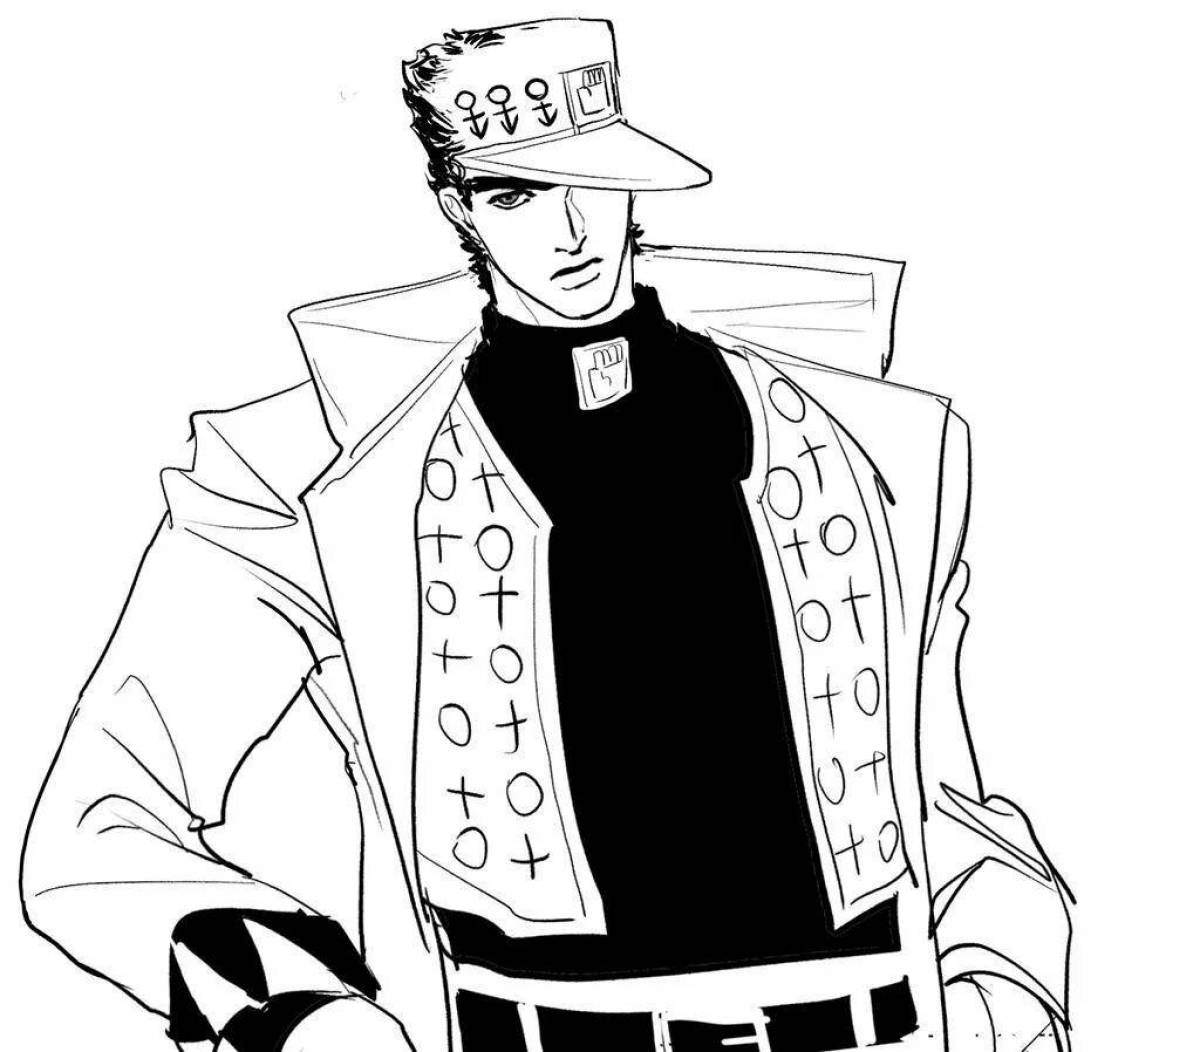 Jotaro kujo's lovely coloring page